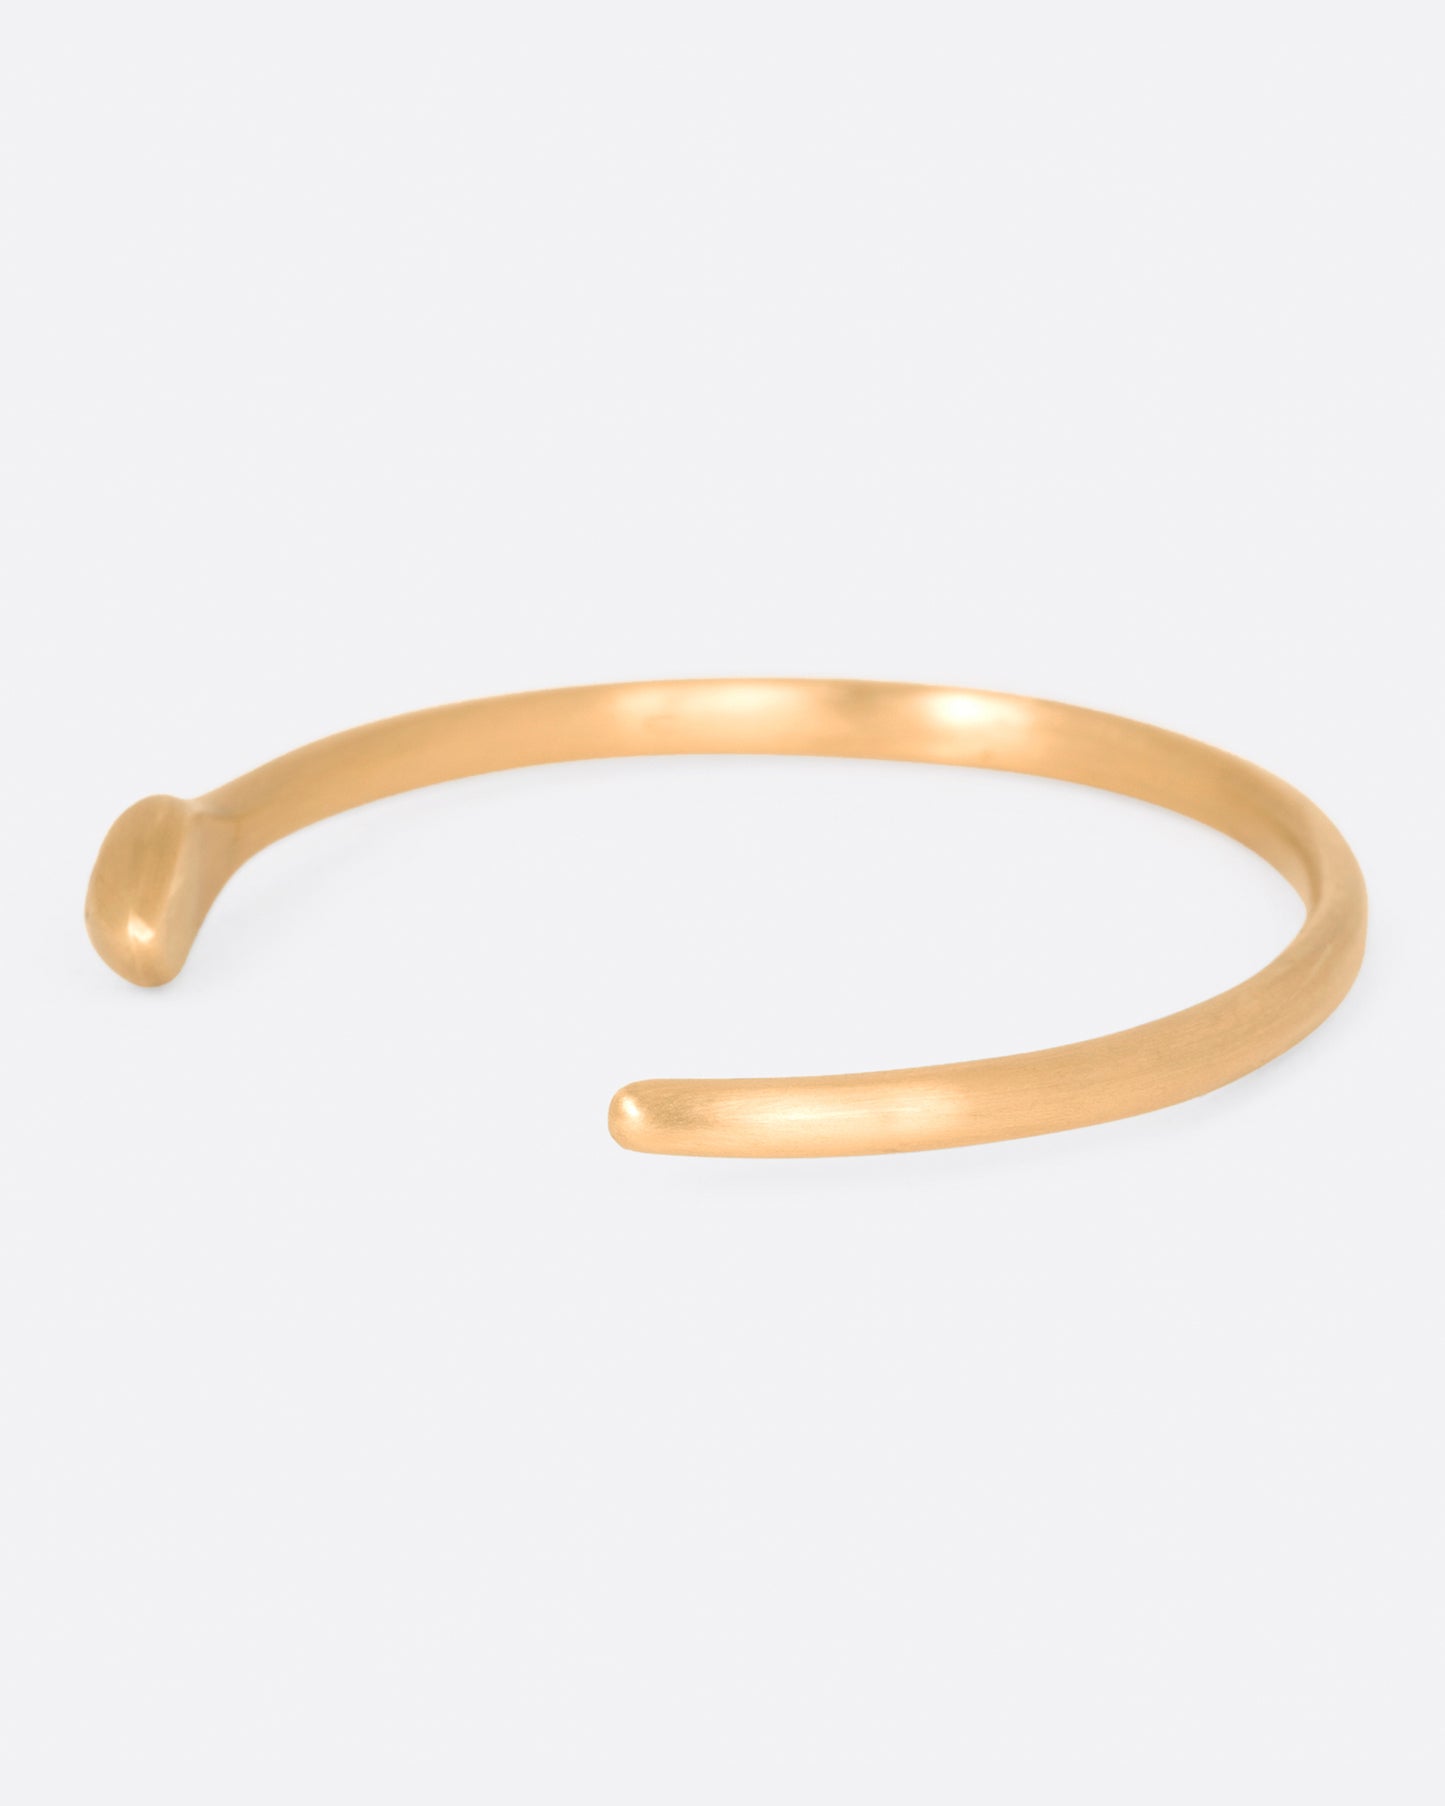 A matte yellow gold snake cuff bracelet with a pear shaped pink sapphire on its head, shown from the side.